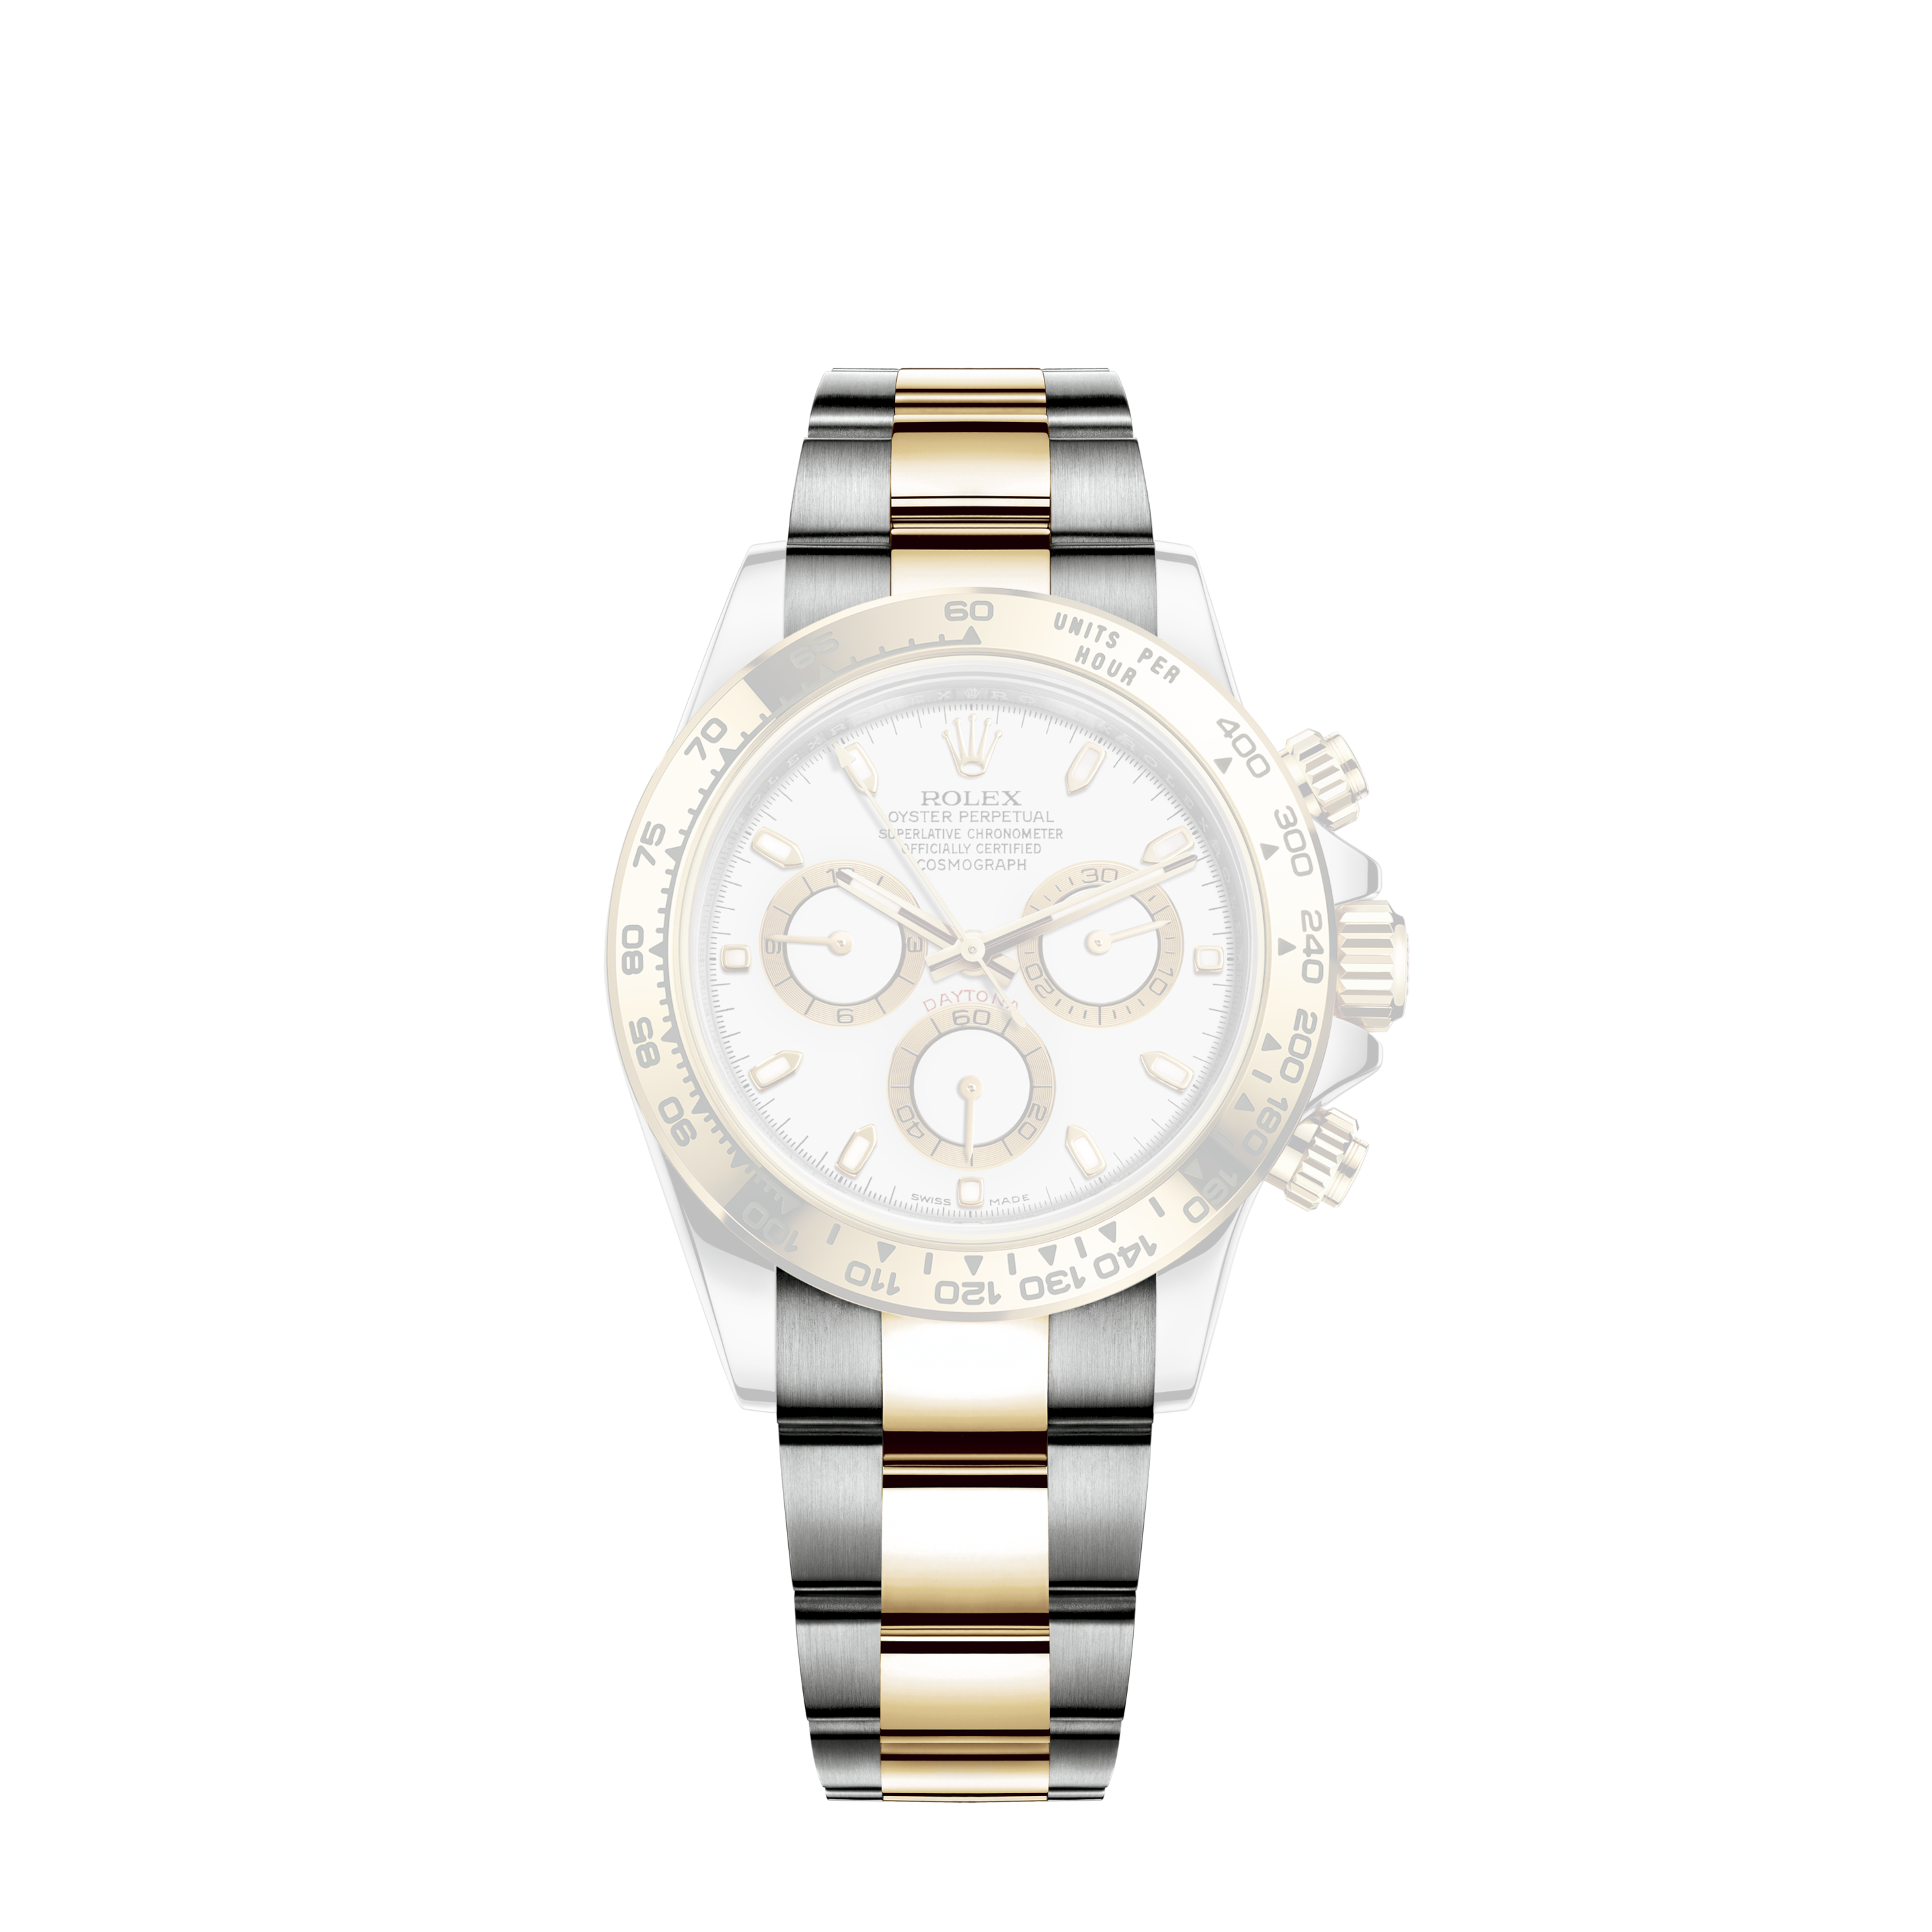 Rolex Datejust 41 Steel and White Gold - Fluted Bezel - Jubilee 126334 BLDJ